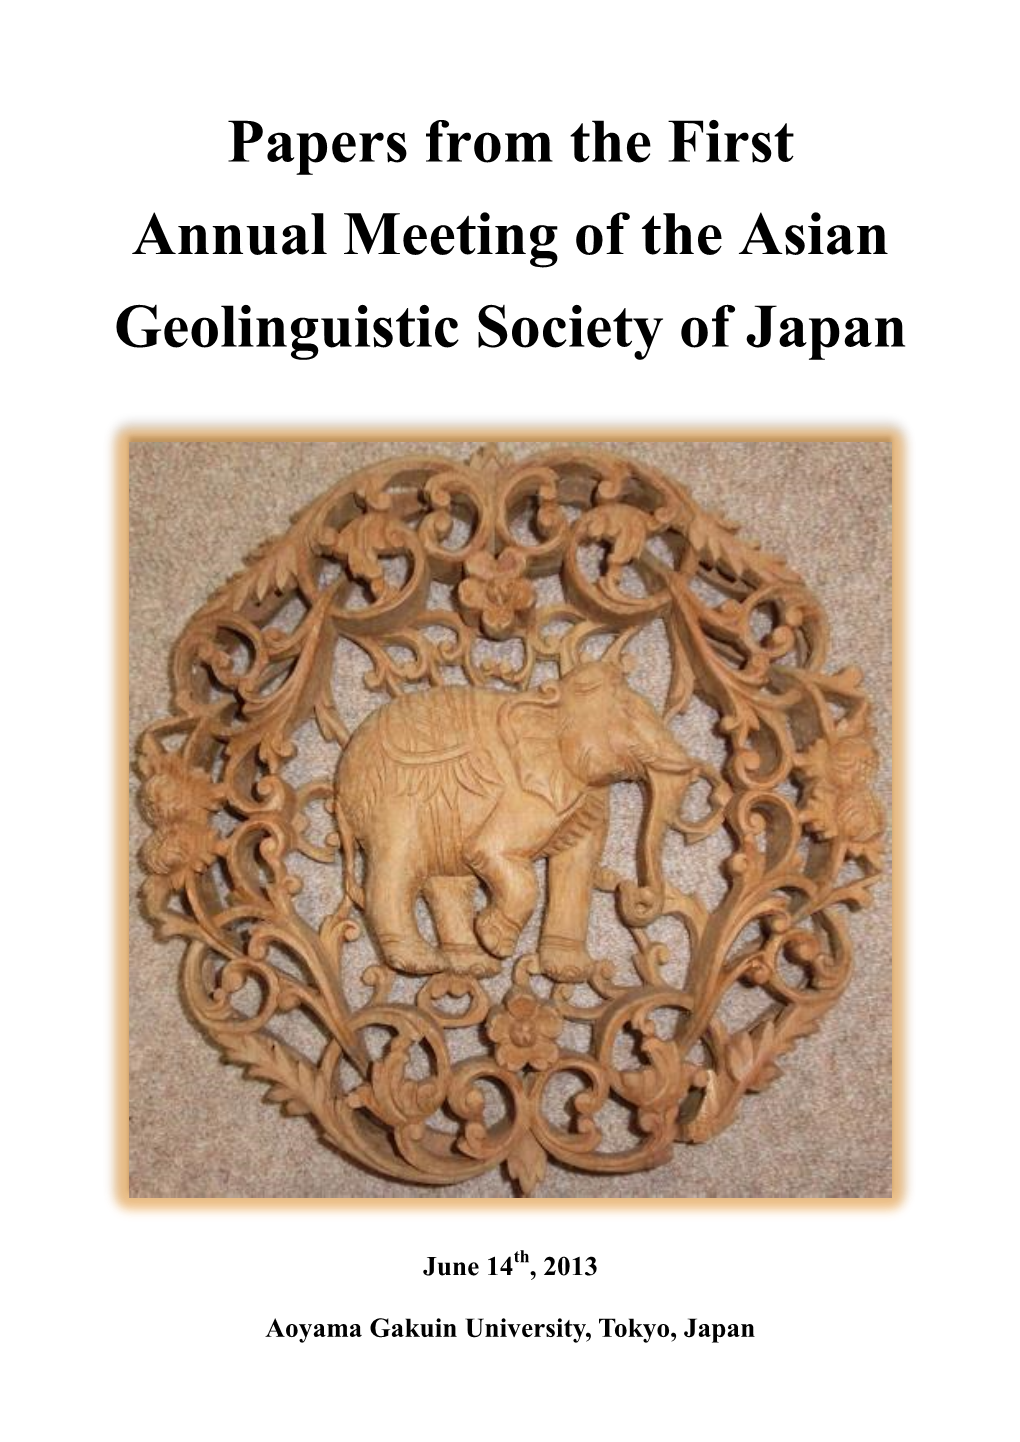 Papers from the First Annual Meeting of the Asian Geolinguistic Society of Japan